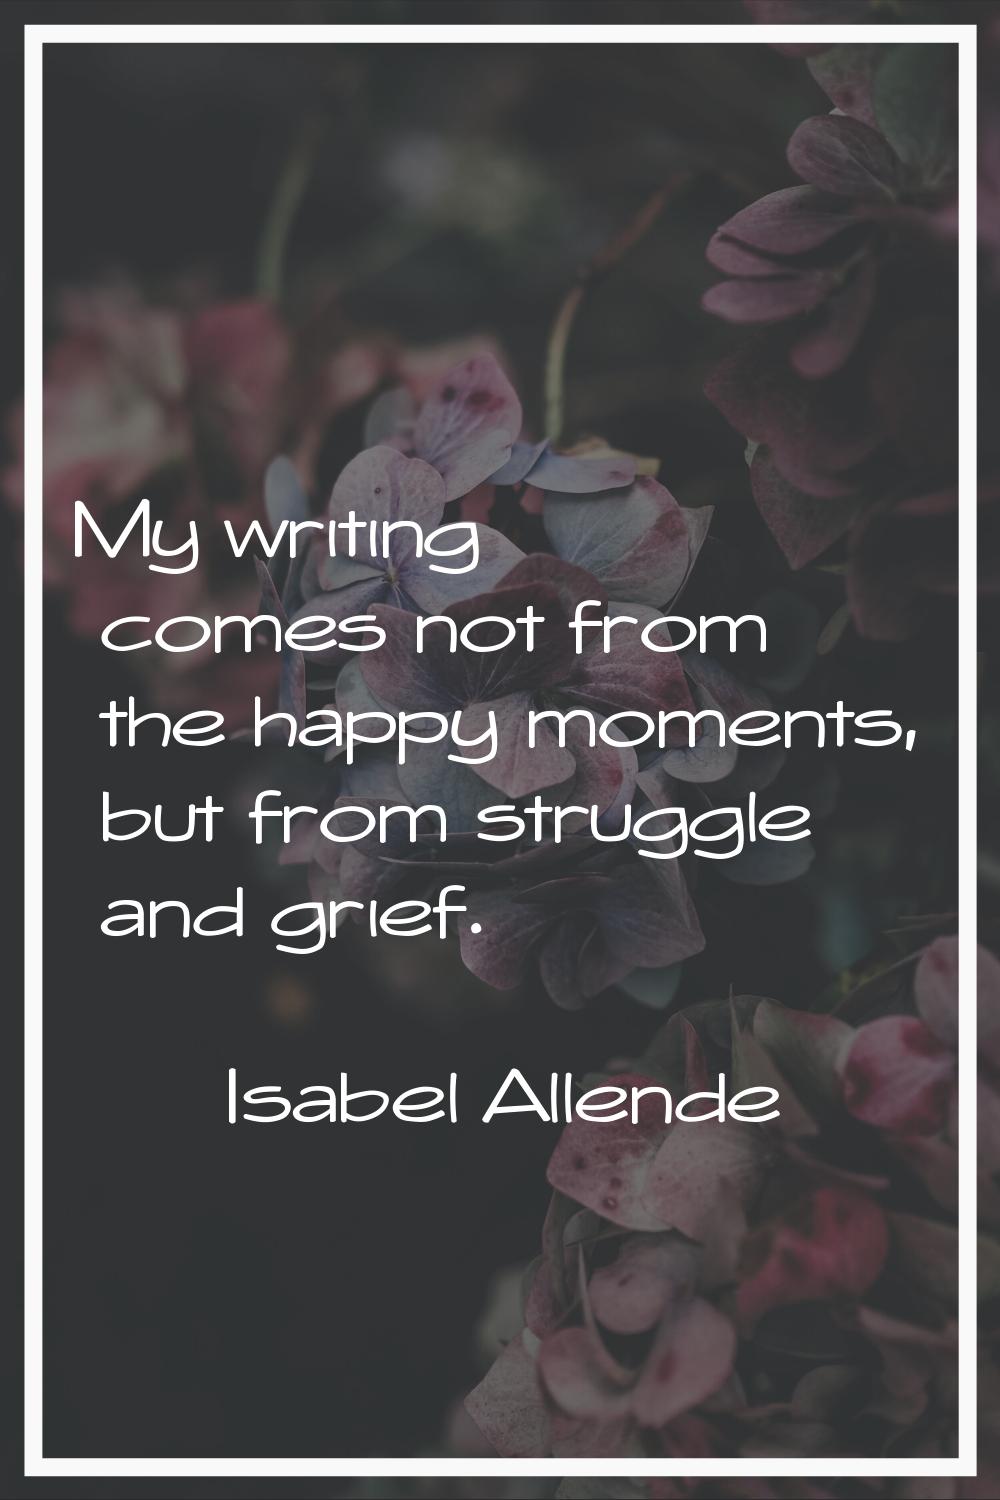 My writing comes not from the happy moments, but from struggle and grief.